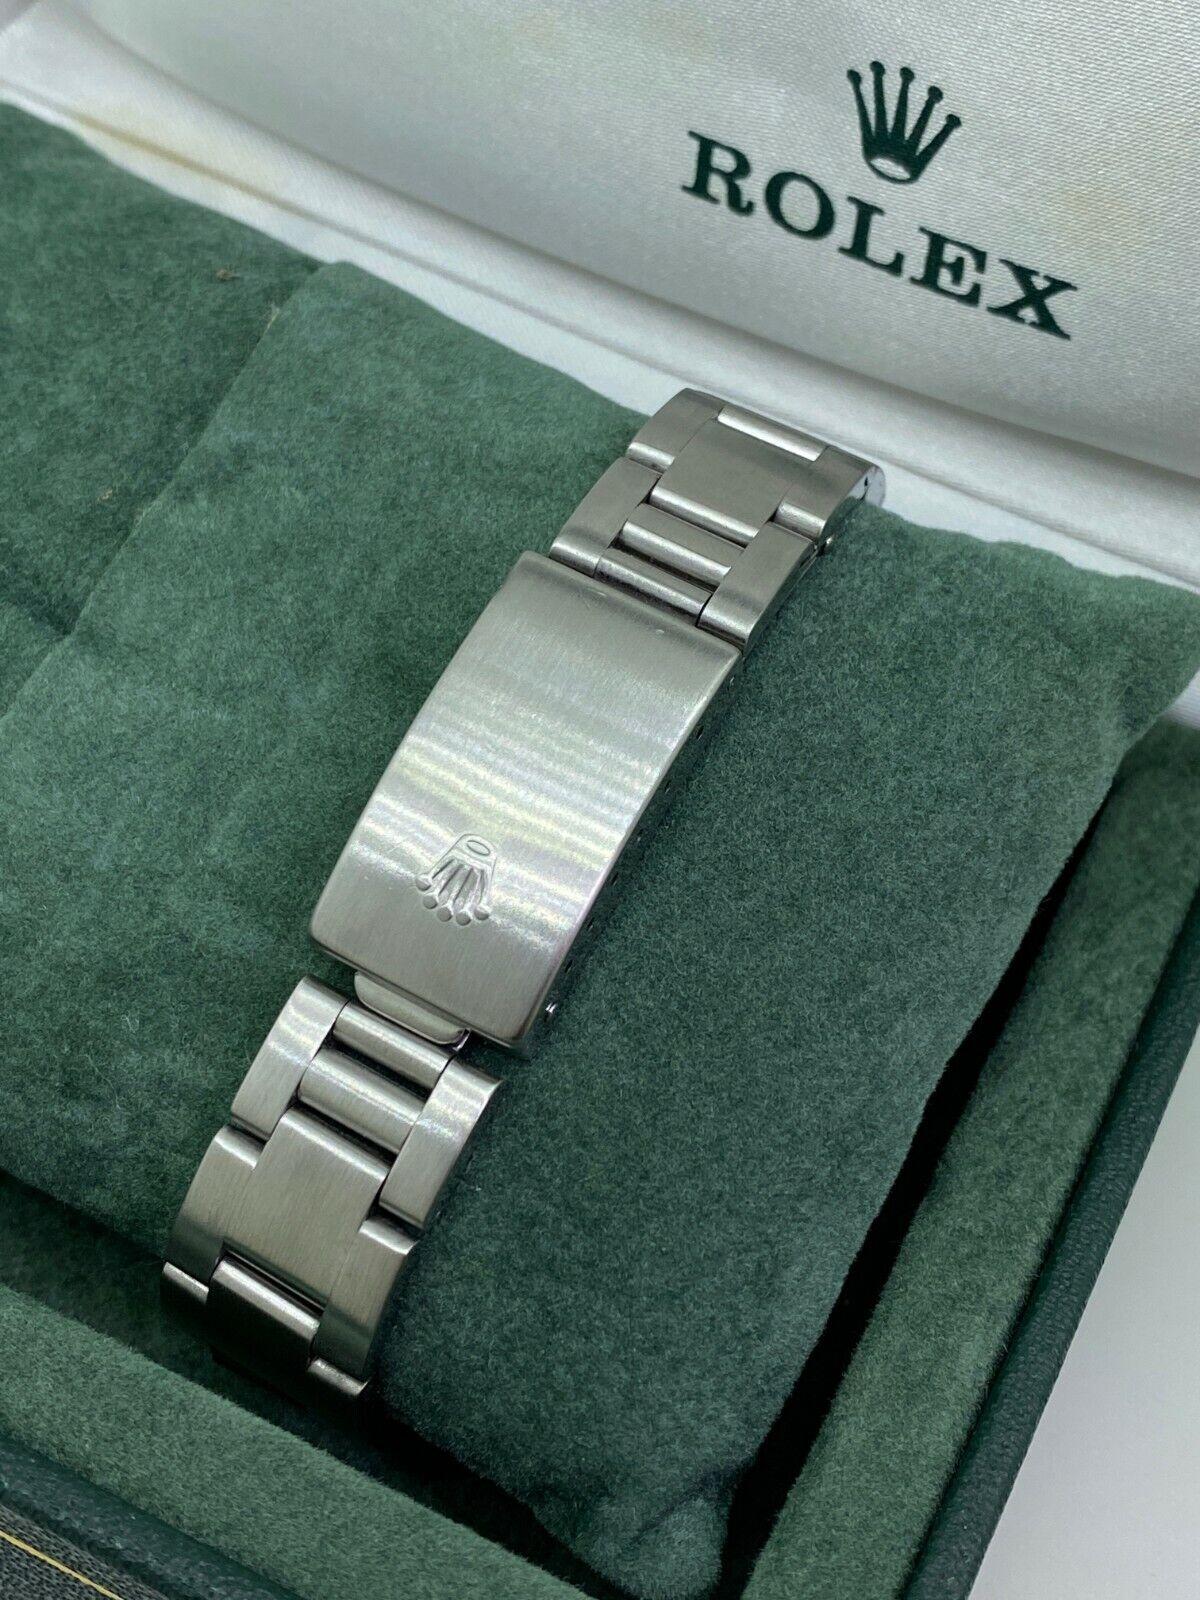 rolex 1908 for sale